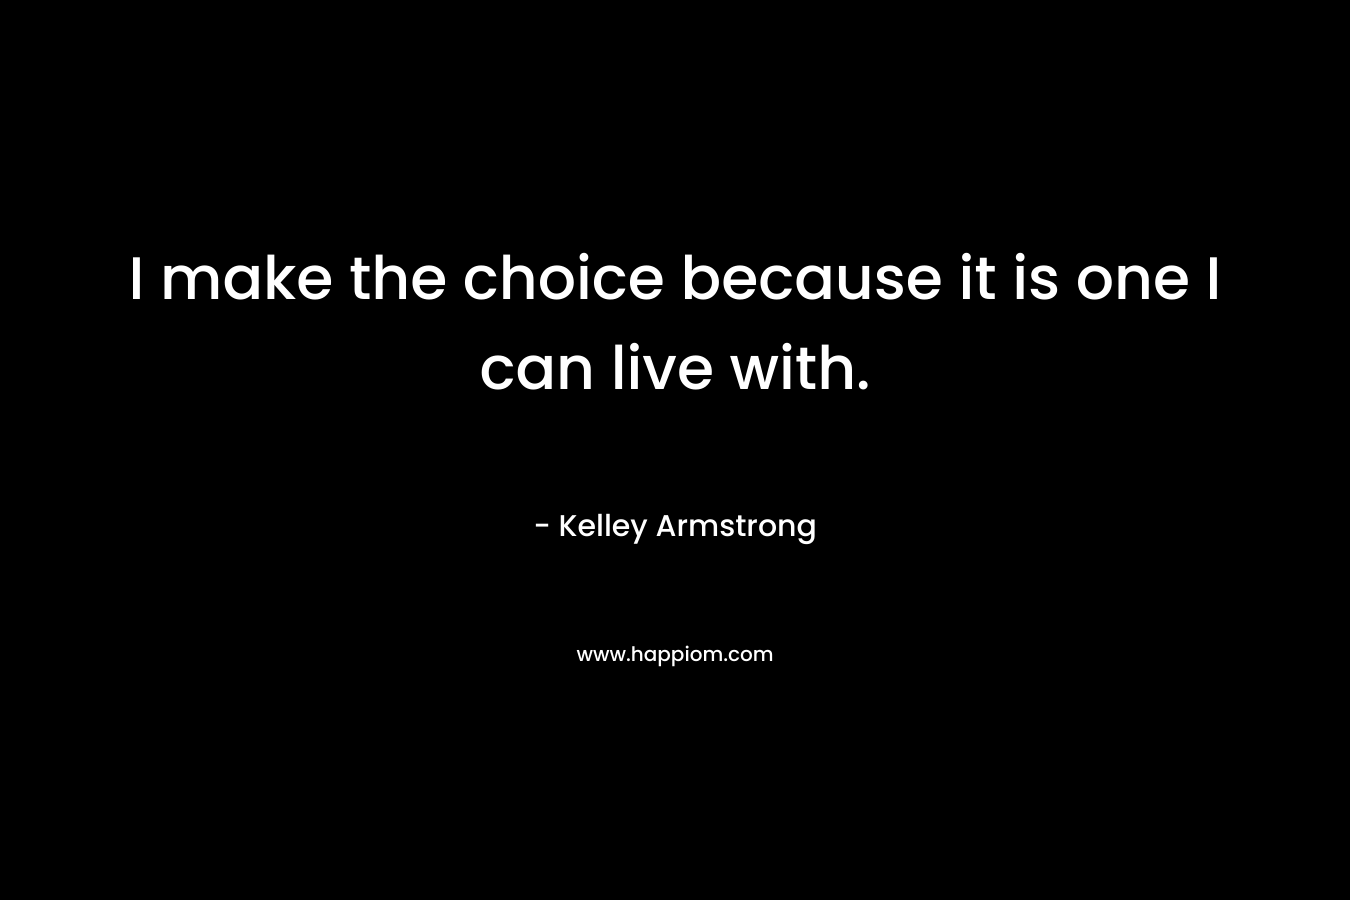 I make the choice because it is one I can live with. – Kelley Armstrong